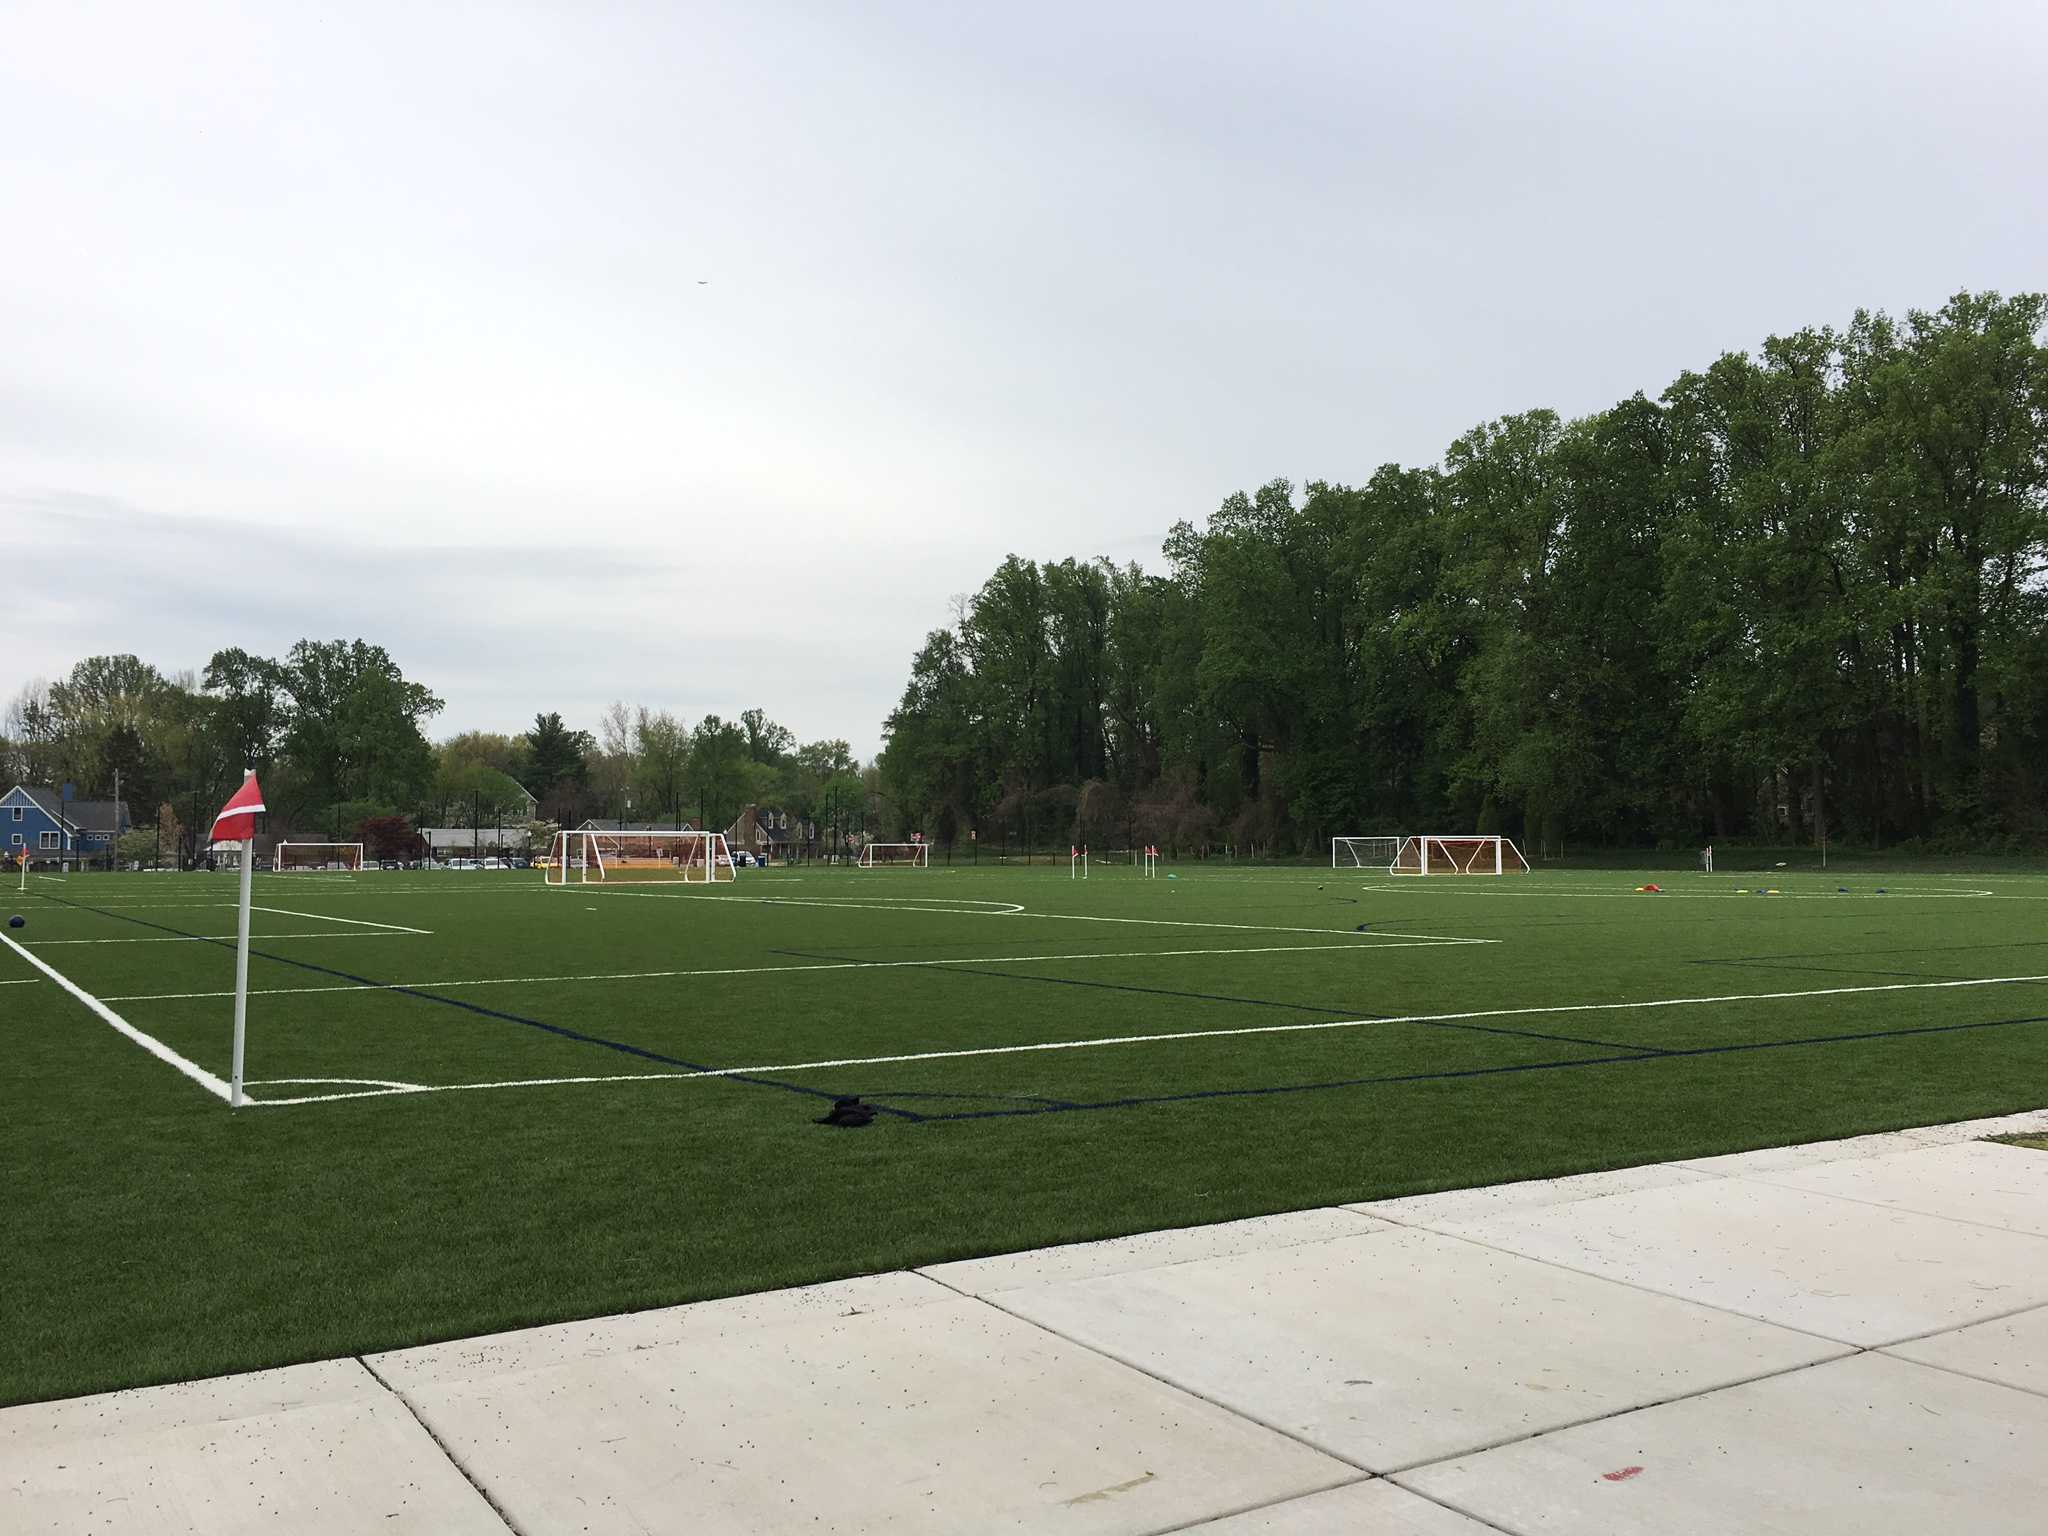 The  new turf soccer fields by Williamsburg Middle School and Discovery Elementary School.